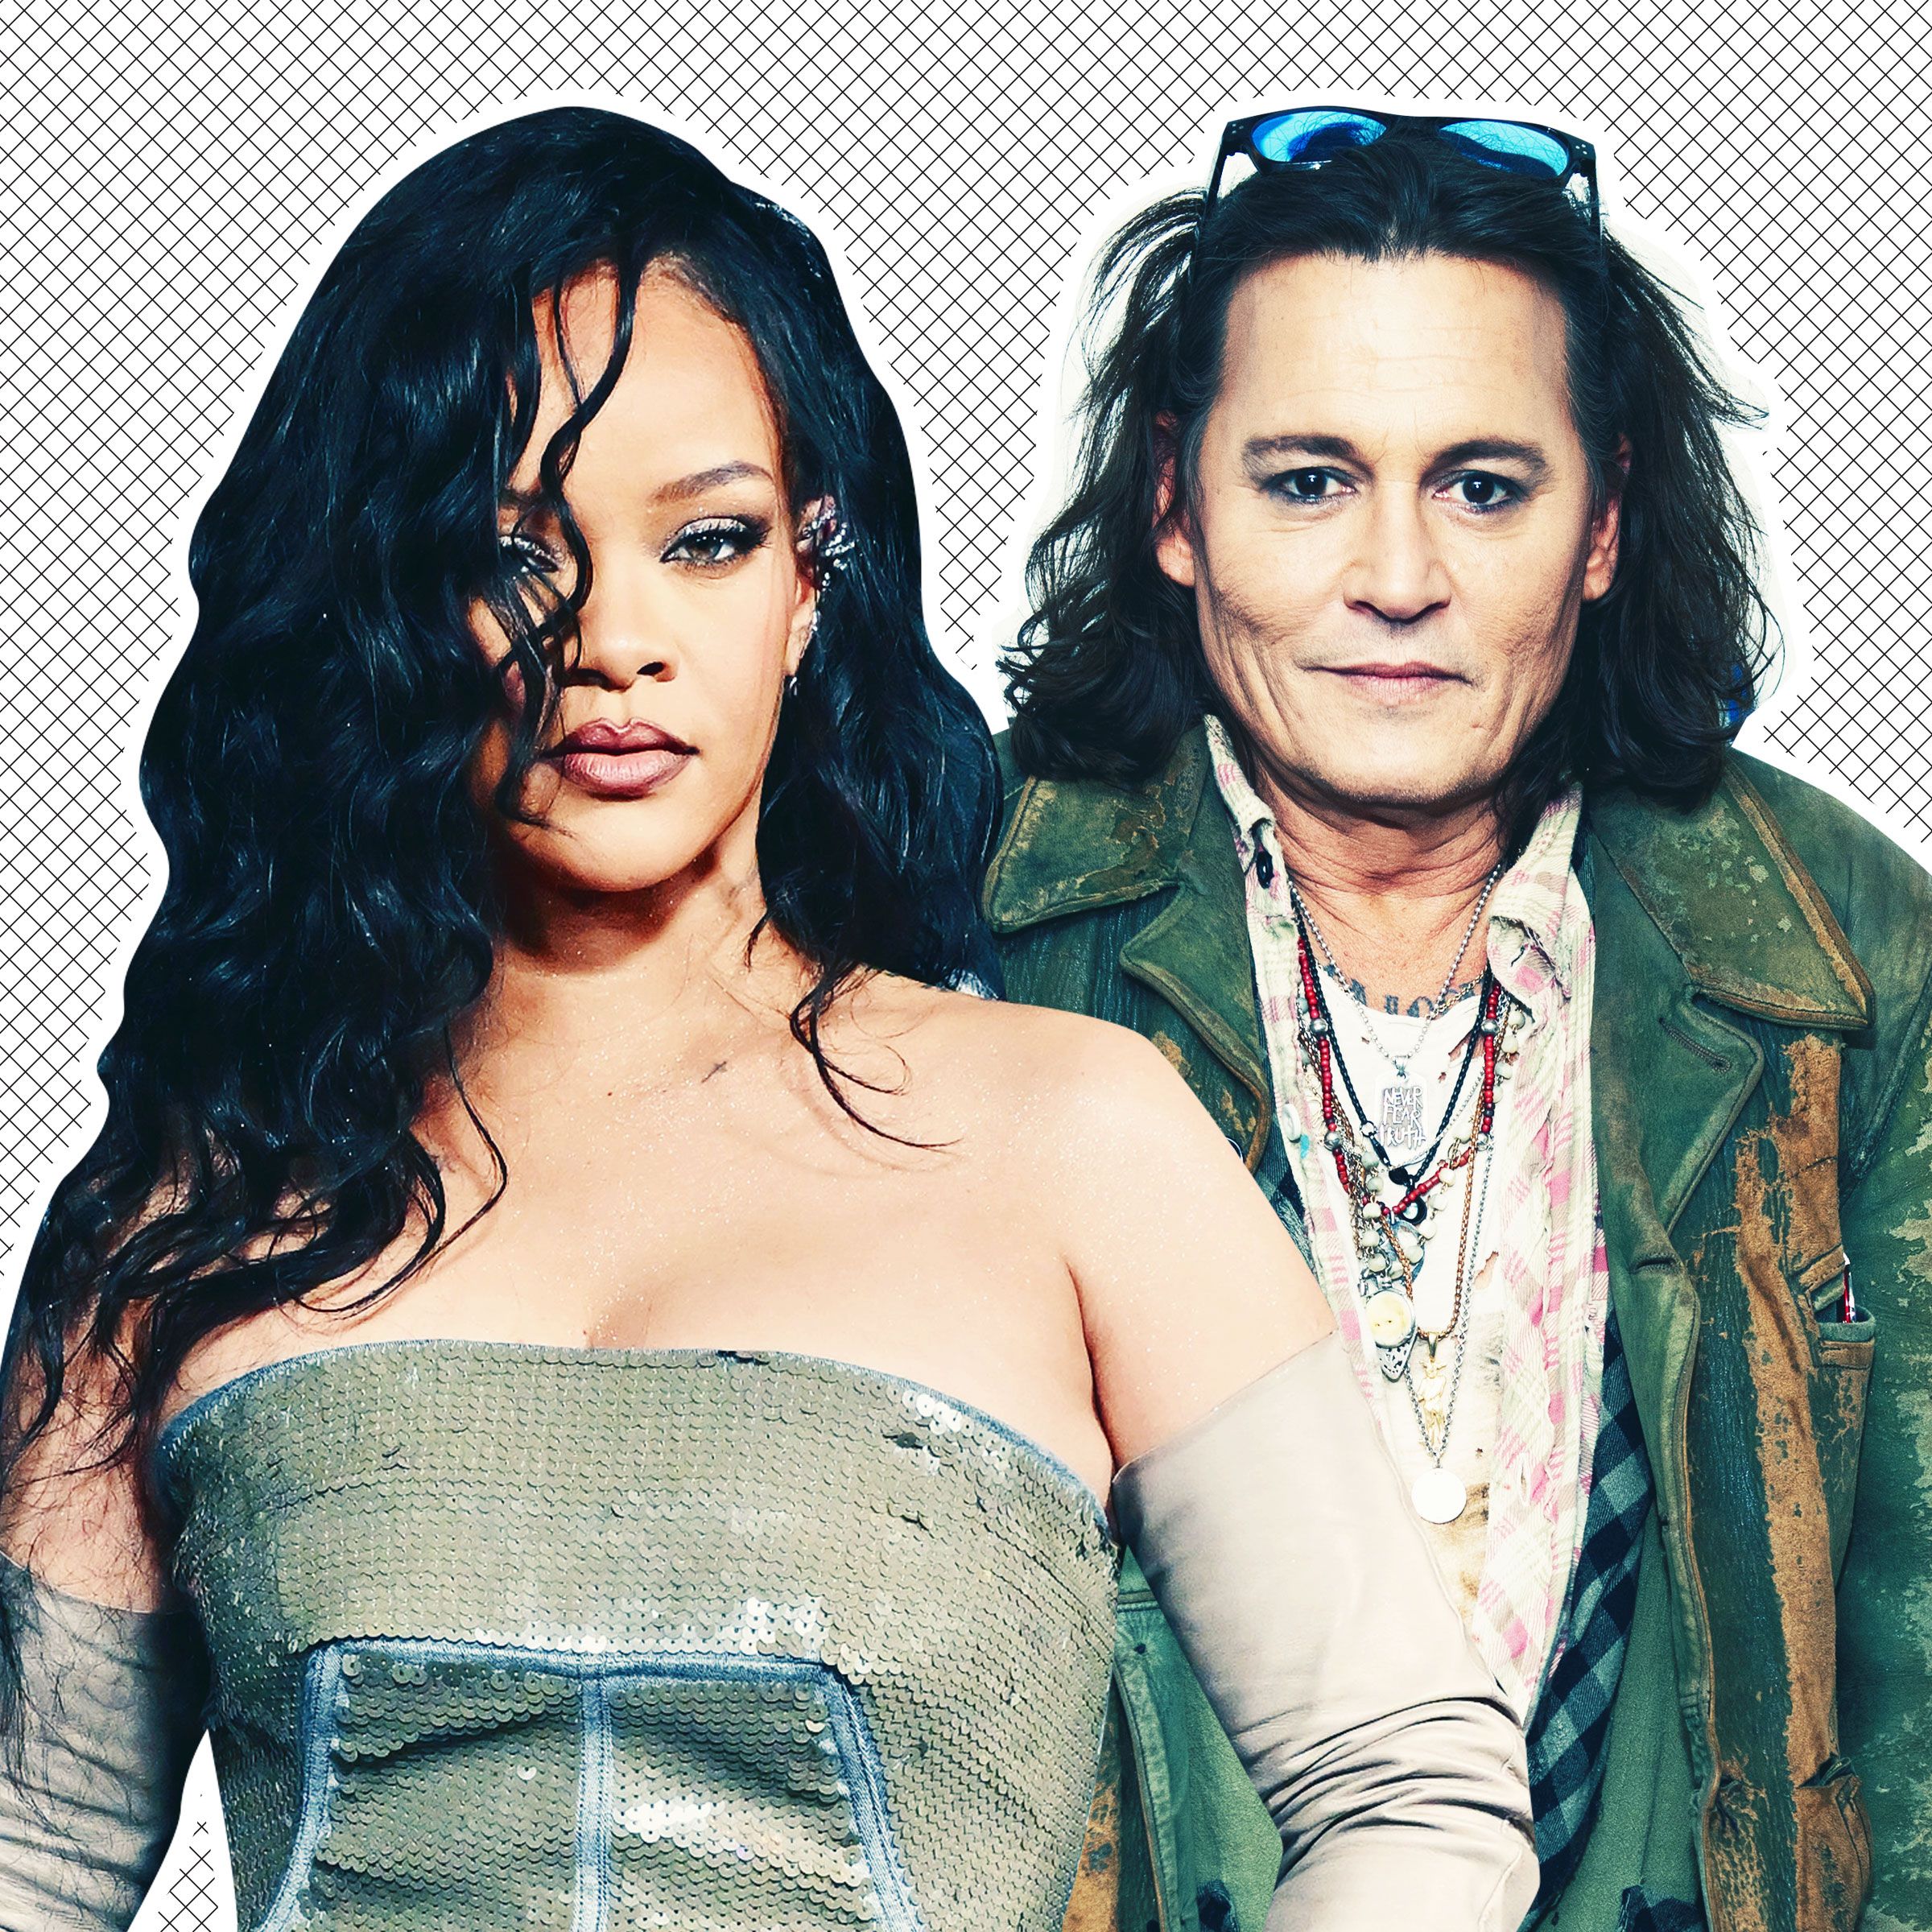 Teub X Porn 11yers Videos - Rihanna to Give Johnny Depp Guest Slot at Fenty Show: Report